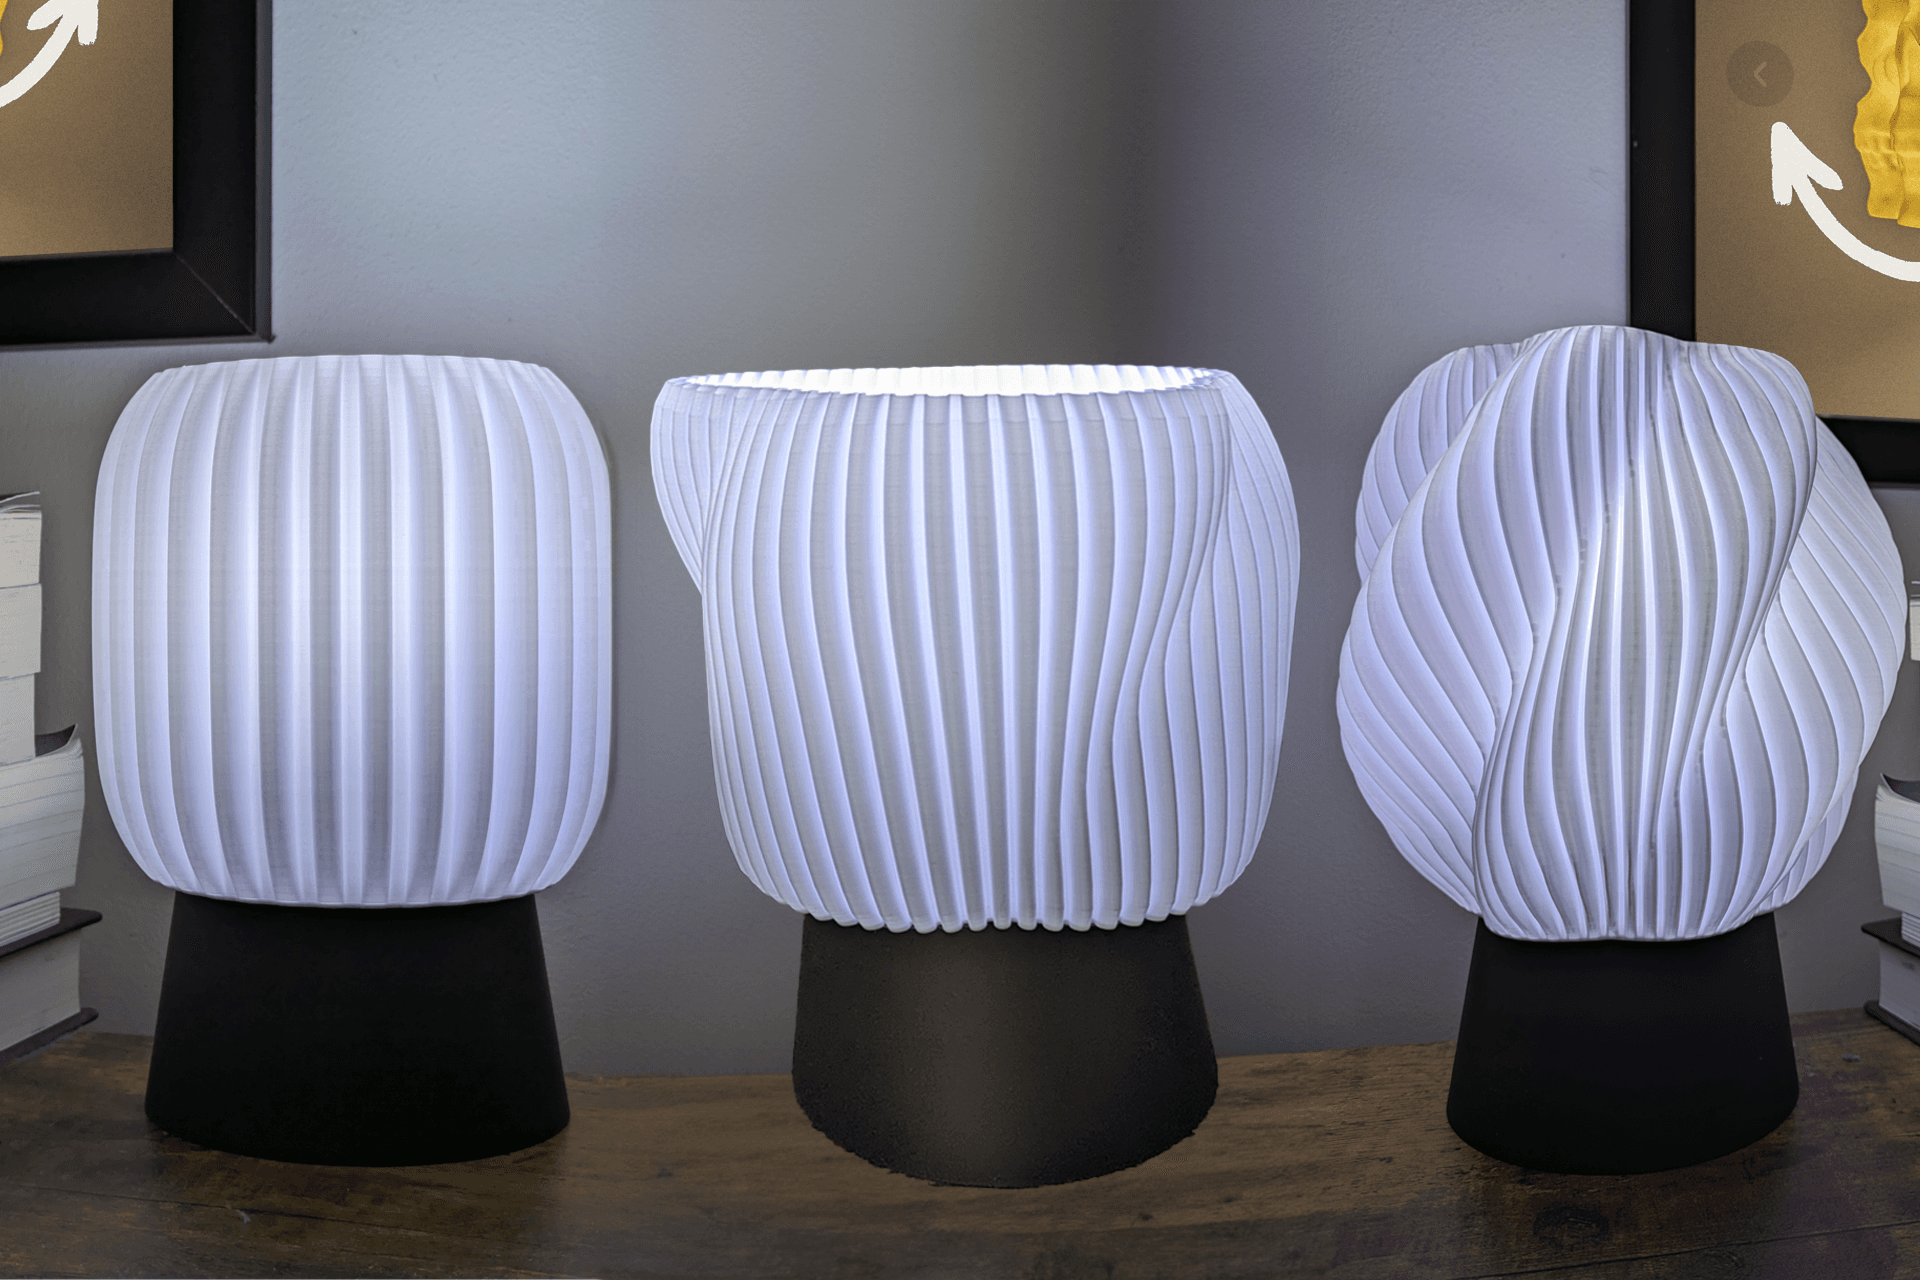 3 New Table Lamps With Vase Mode Lamp Shades